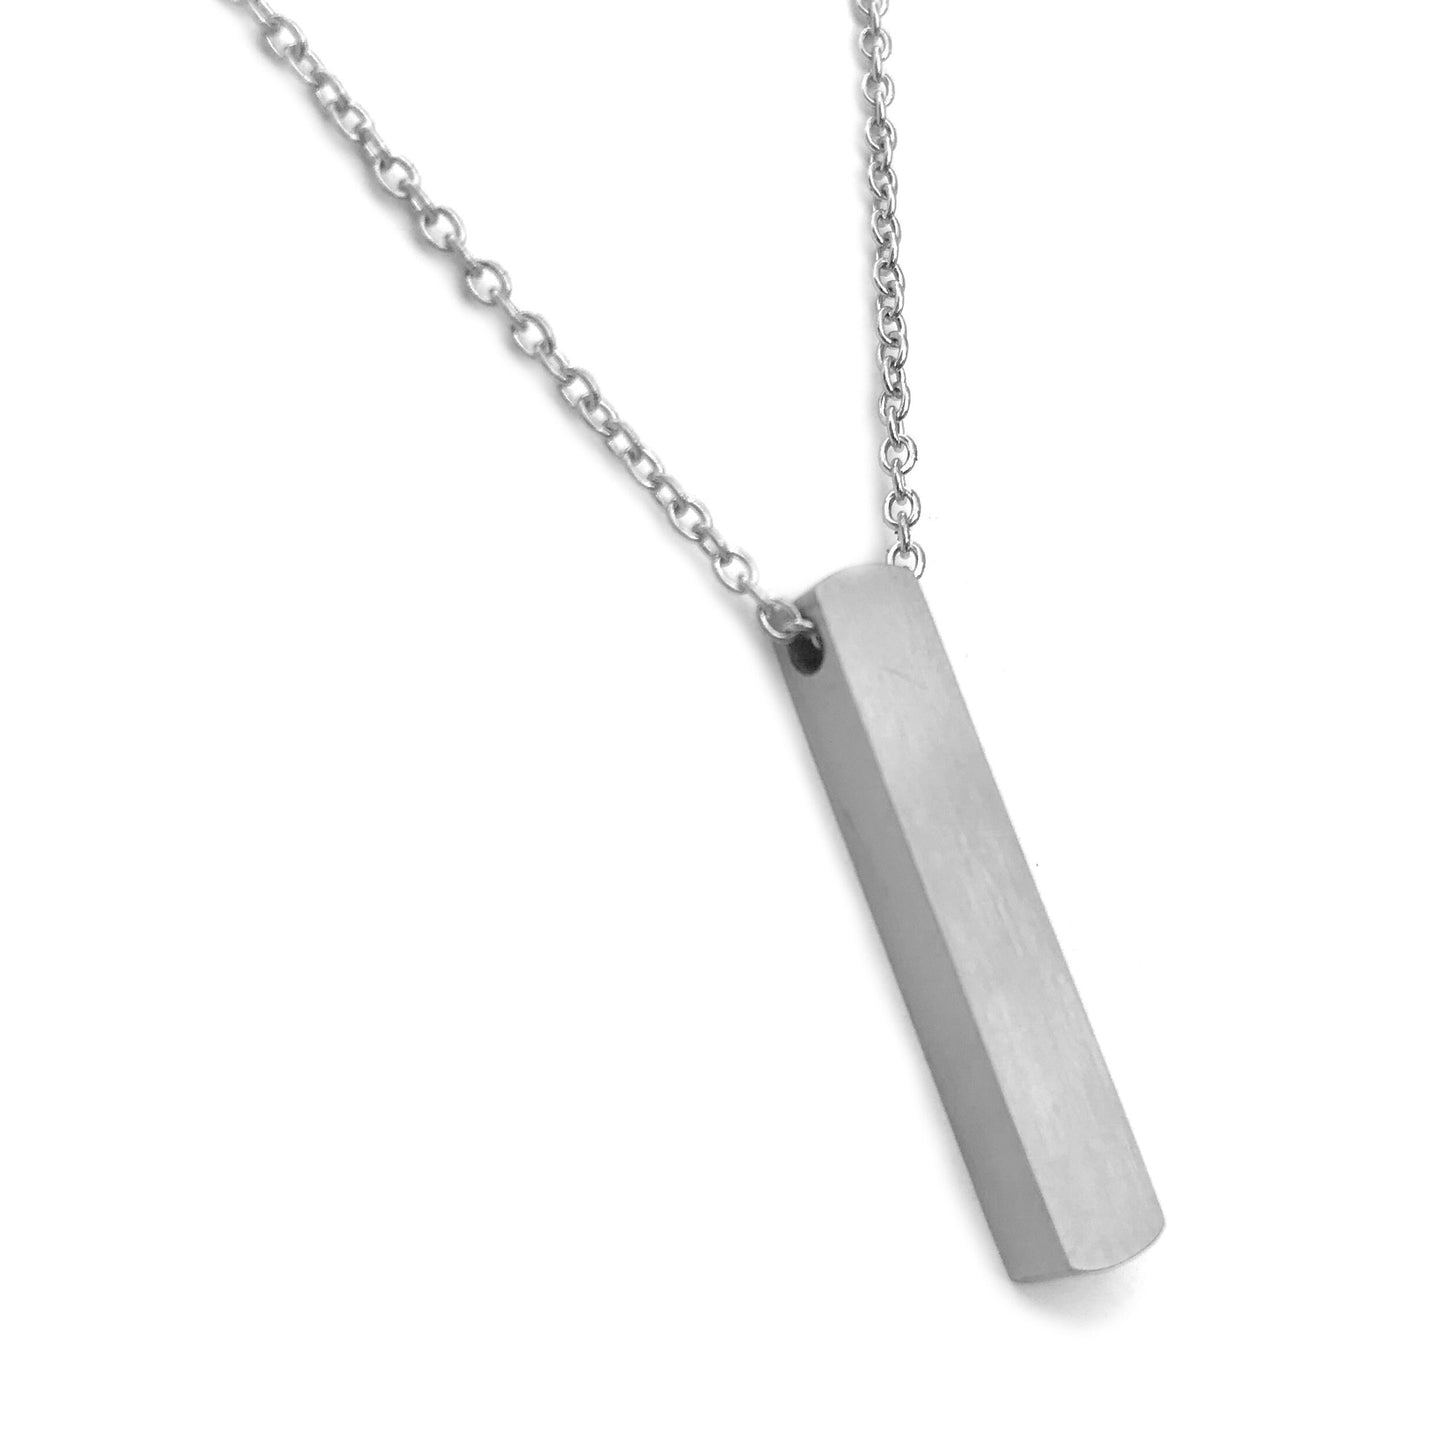 Simple Bar Necklace, Brushed Silver Jewelry, Geometric Pendant, Minimailst Style, Stainless Steel, Gift for Sister, 11th Anniversary